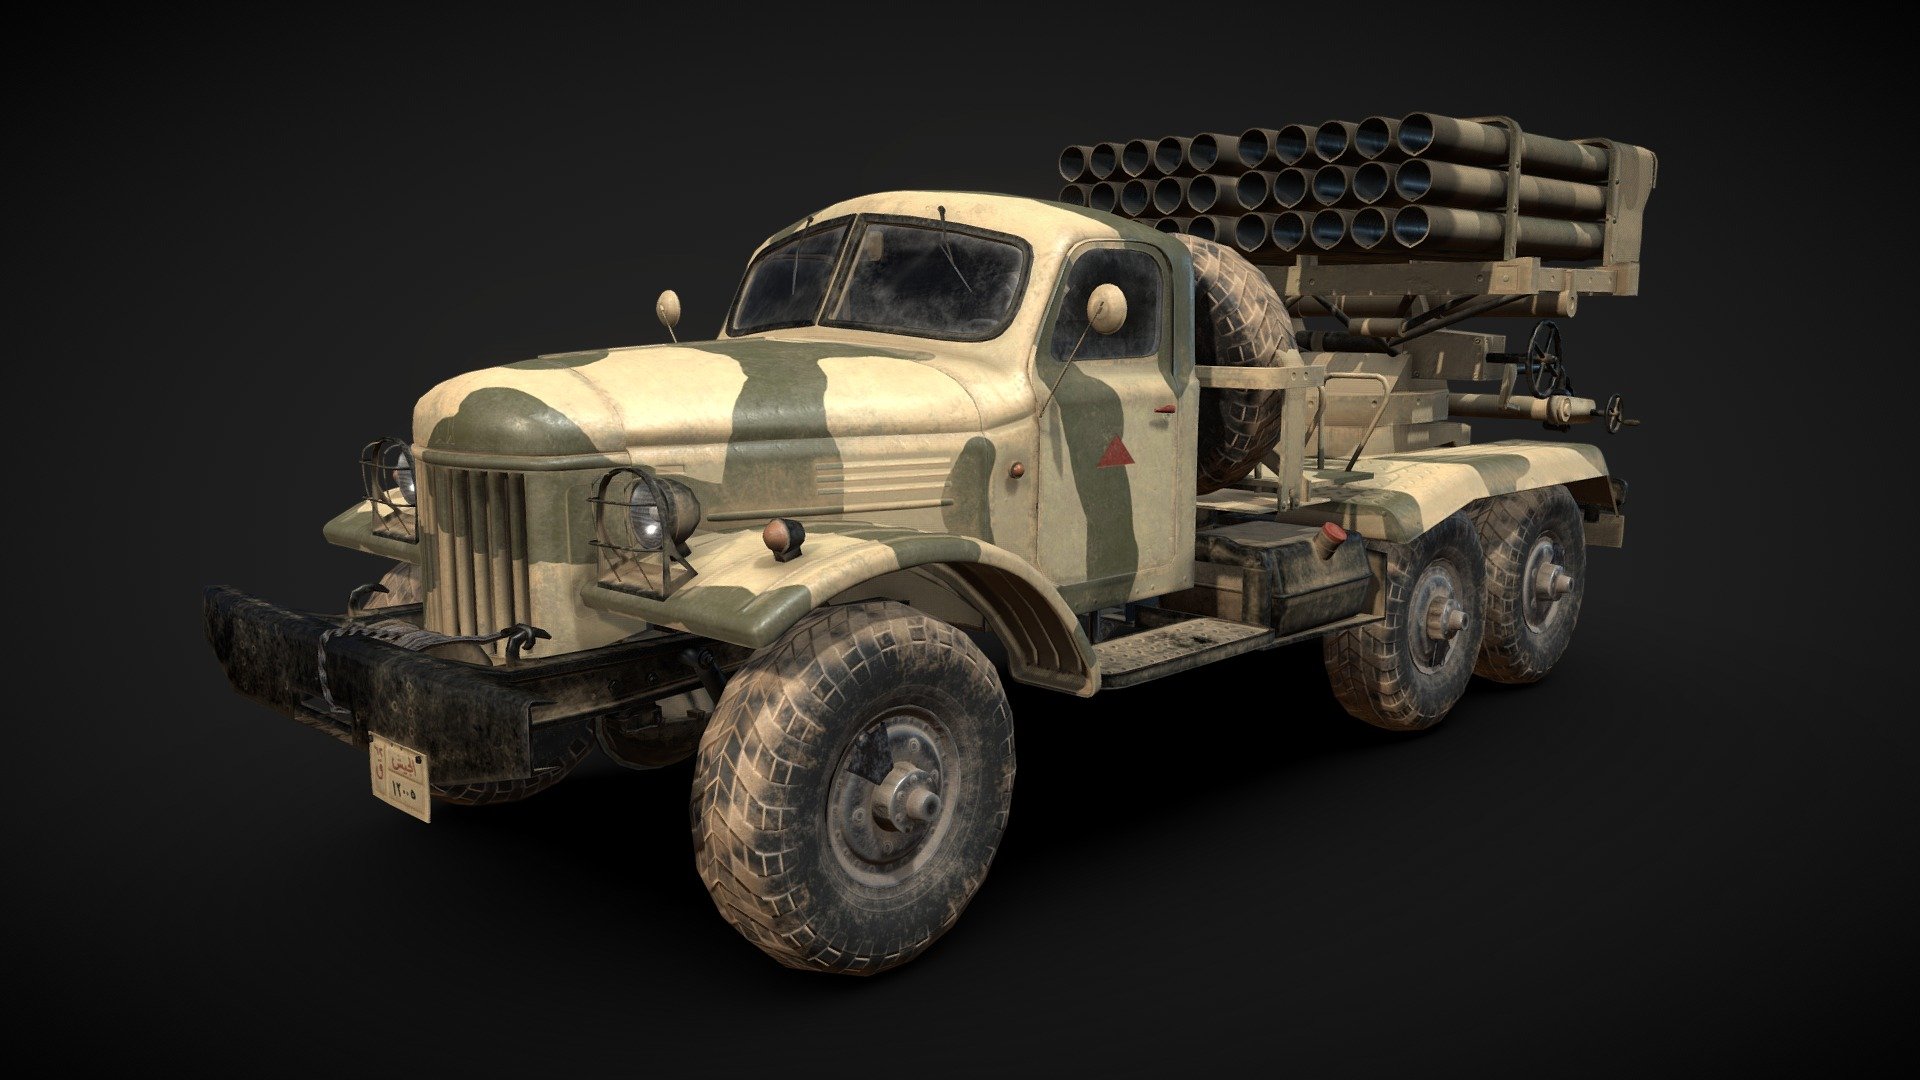 A Middle Eastern or desert envrinoment Zil 157 BM-21 a Varient of Soviet Grad system but with less rockets similer to this photo.
https://i.imgur.com/ERcbeaK.png
Game Ready - for Real time Engines.
Low poly with interior and small details.
Rigged and Ready for Game engine.
3ds max file included (removed due to thieft from sketchfab).

8k textures are available when you buy it. contact me at sameharansa@hotmail.com - Zil 157 BM-21 - Buy Royalty Free 3D model by Sameh Aransa (@sameharansa) 3d model